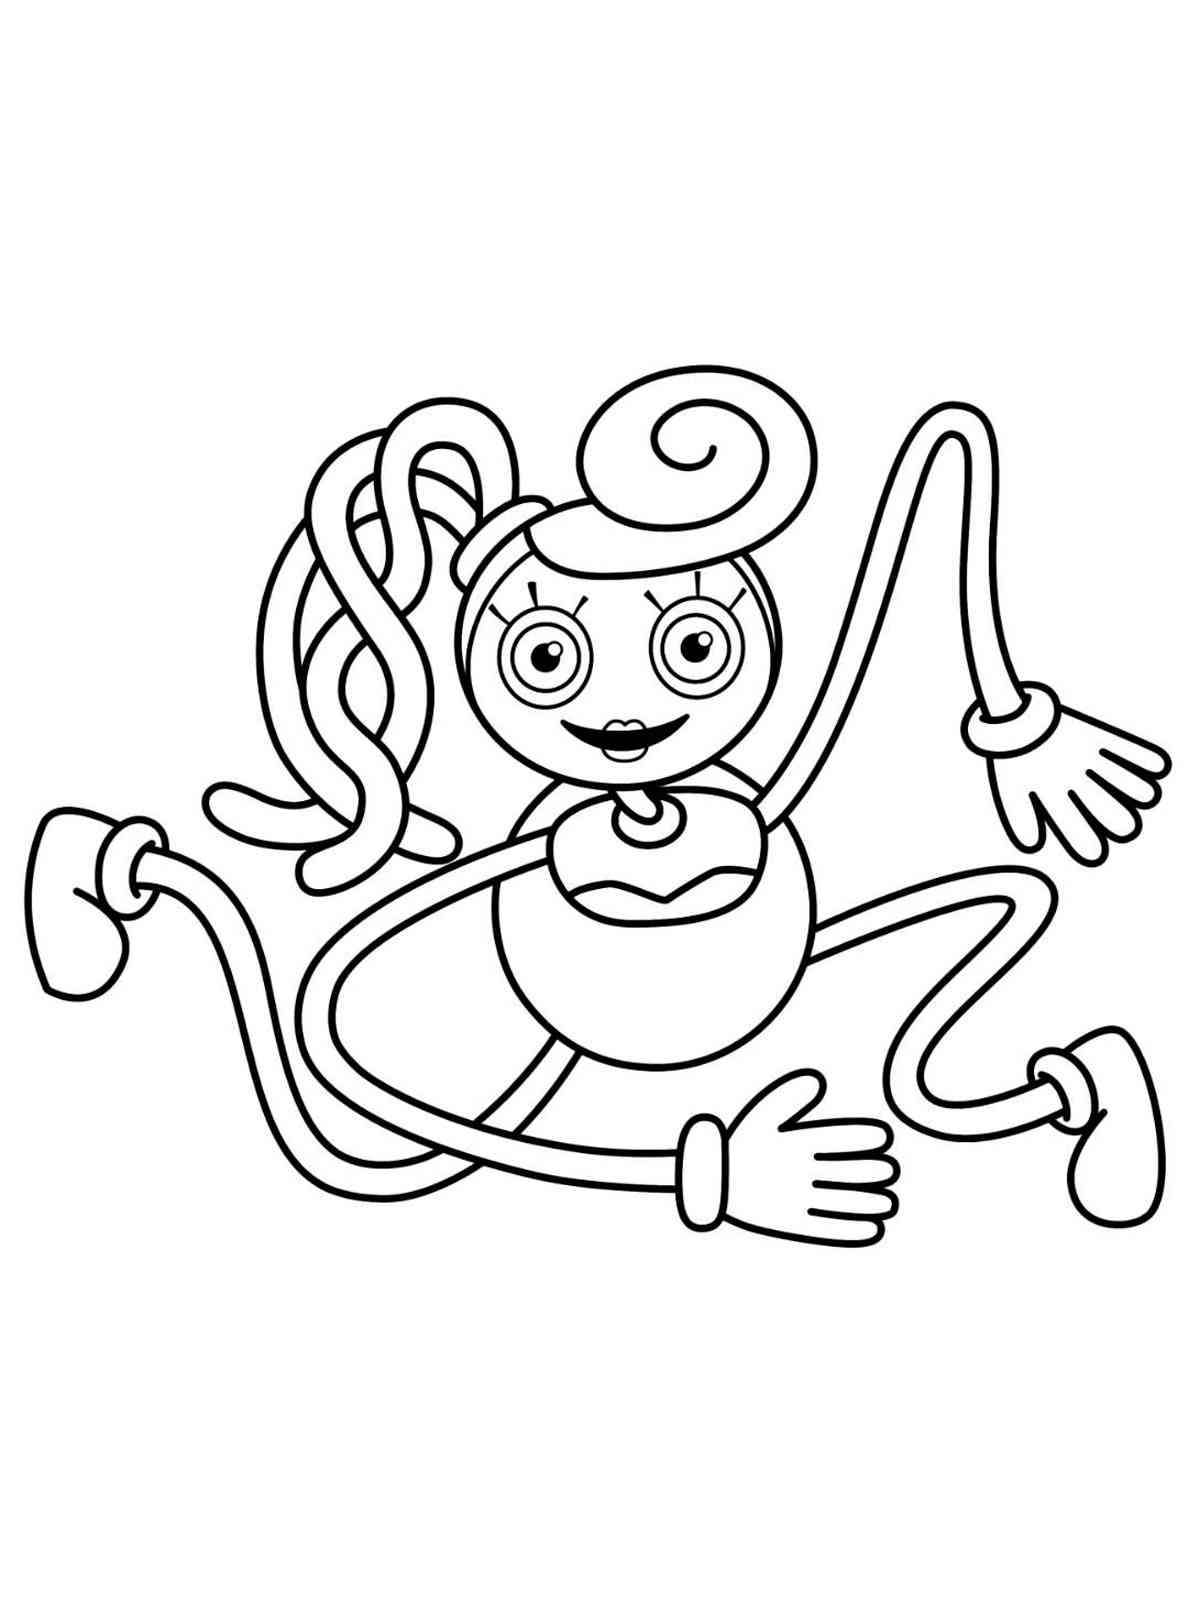 Poppy Playtime Mommy Long Legs coloring page